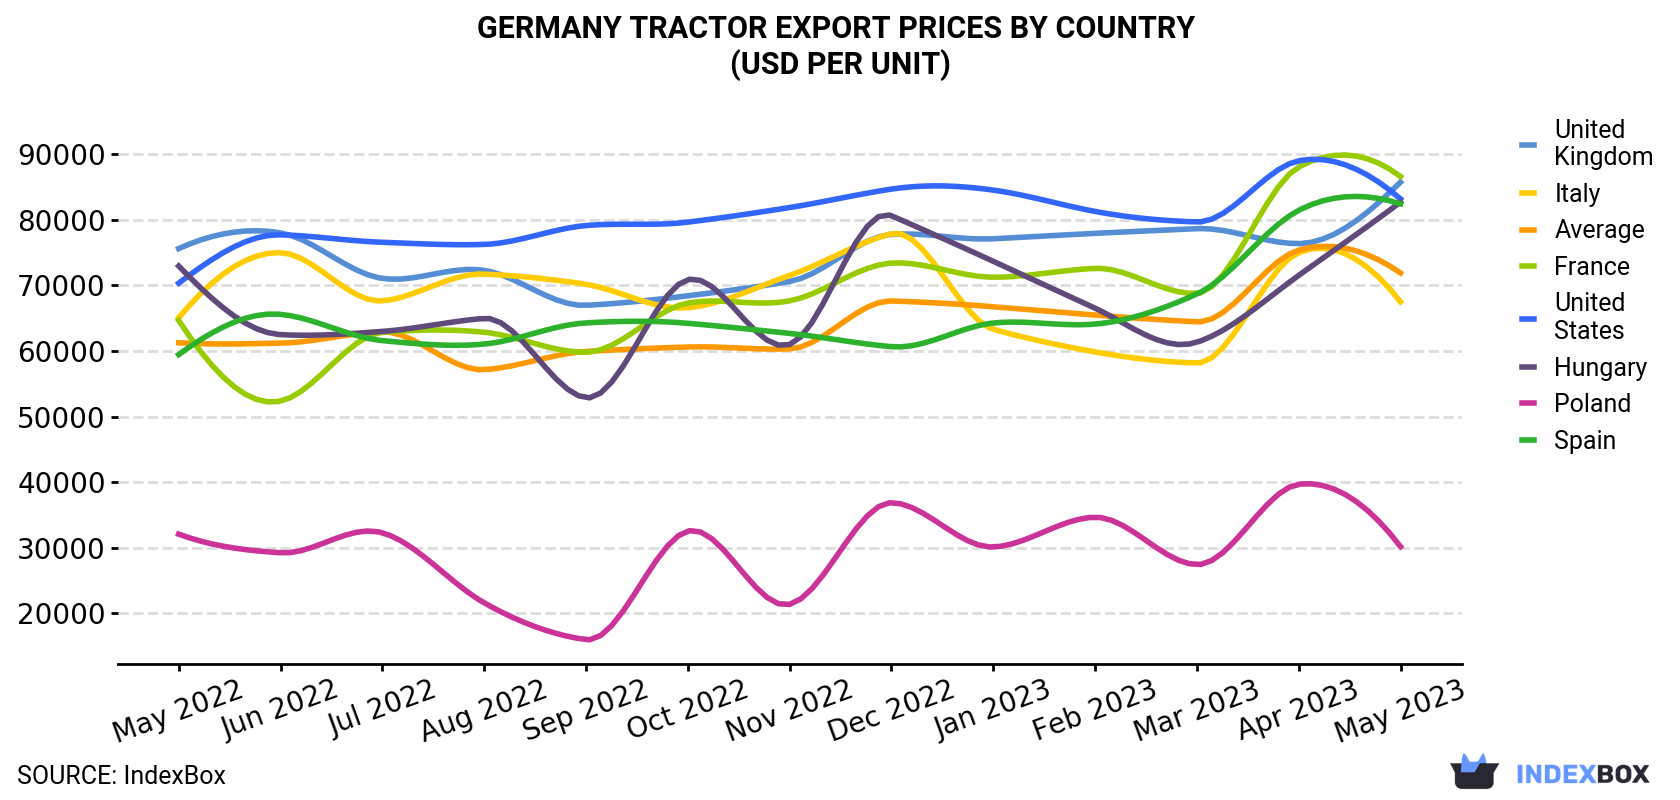 Germany Tractor Export Prices By Country (USD Per Unit)